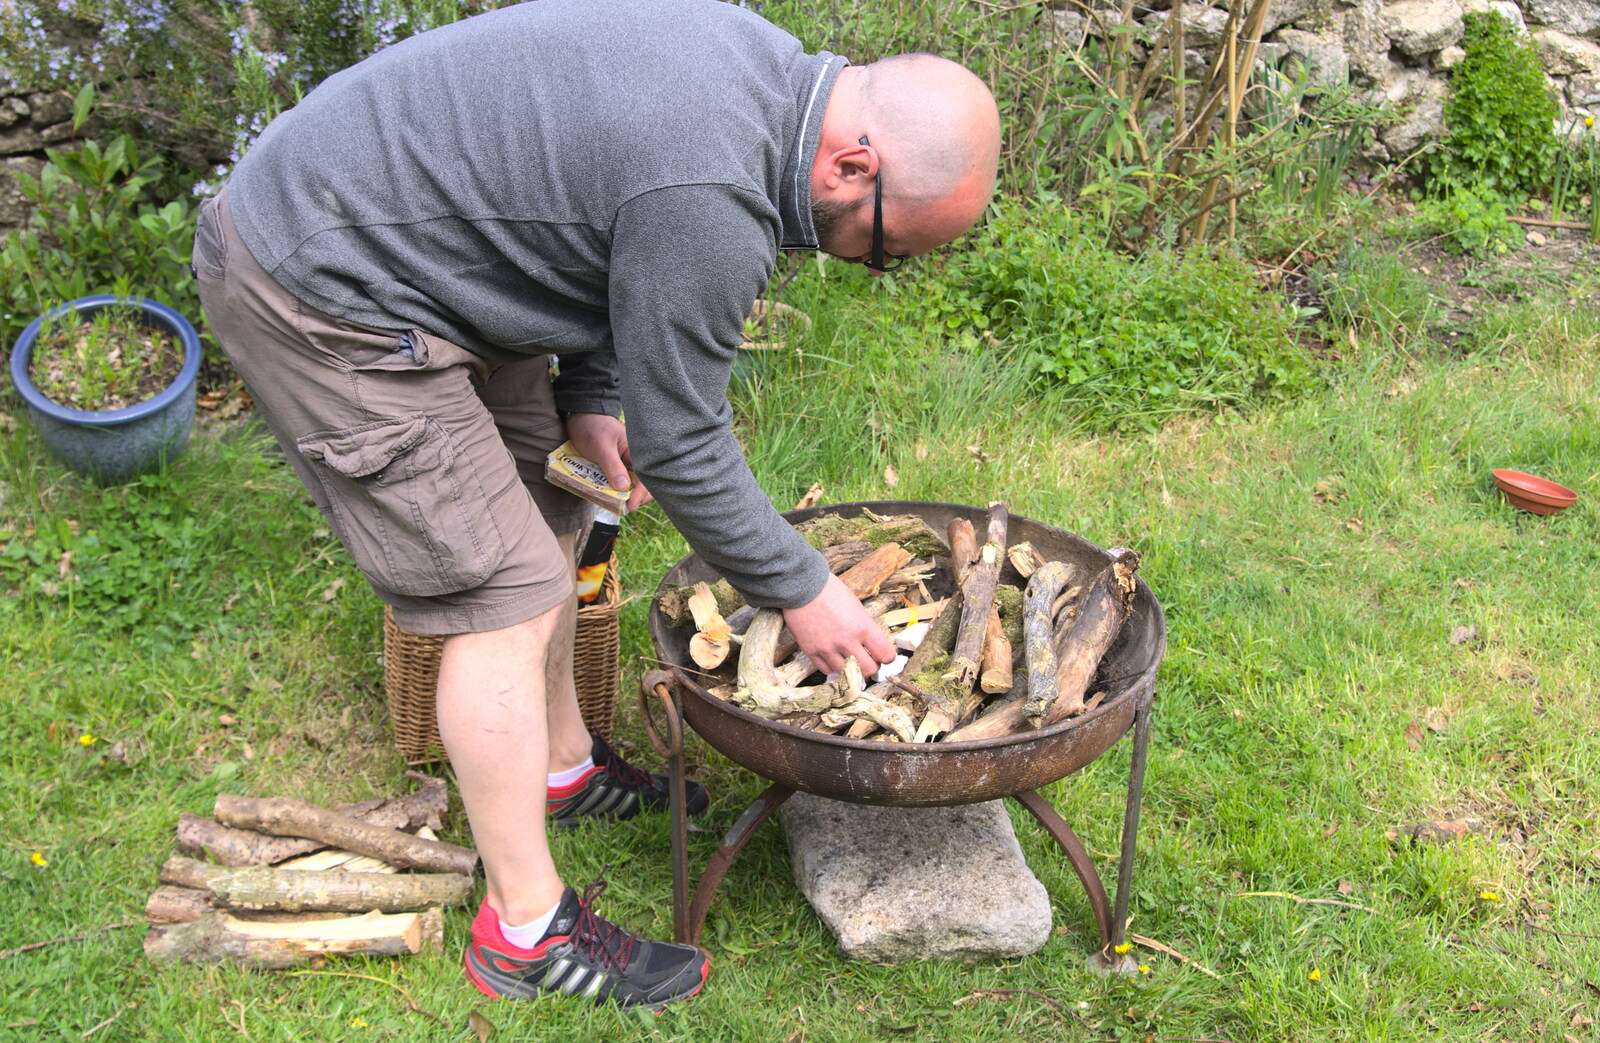 Matt loads up the barbeque from A Barbeque, Grimspound and Pizza, Dartmoor and Exeter, Devon - 15th April 2017